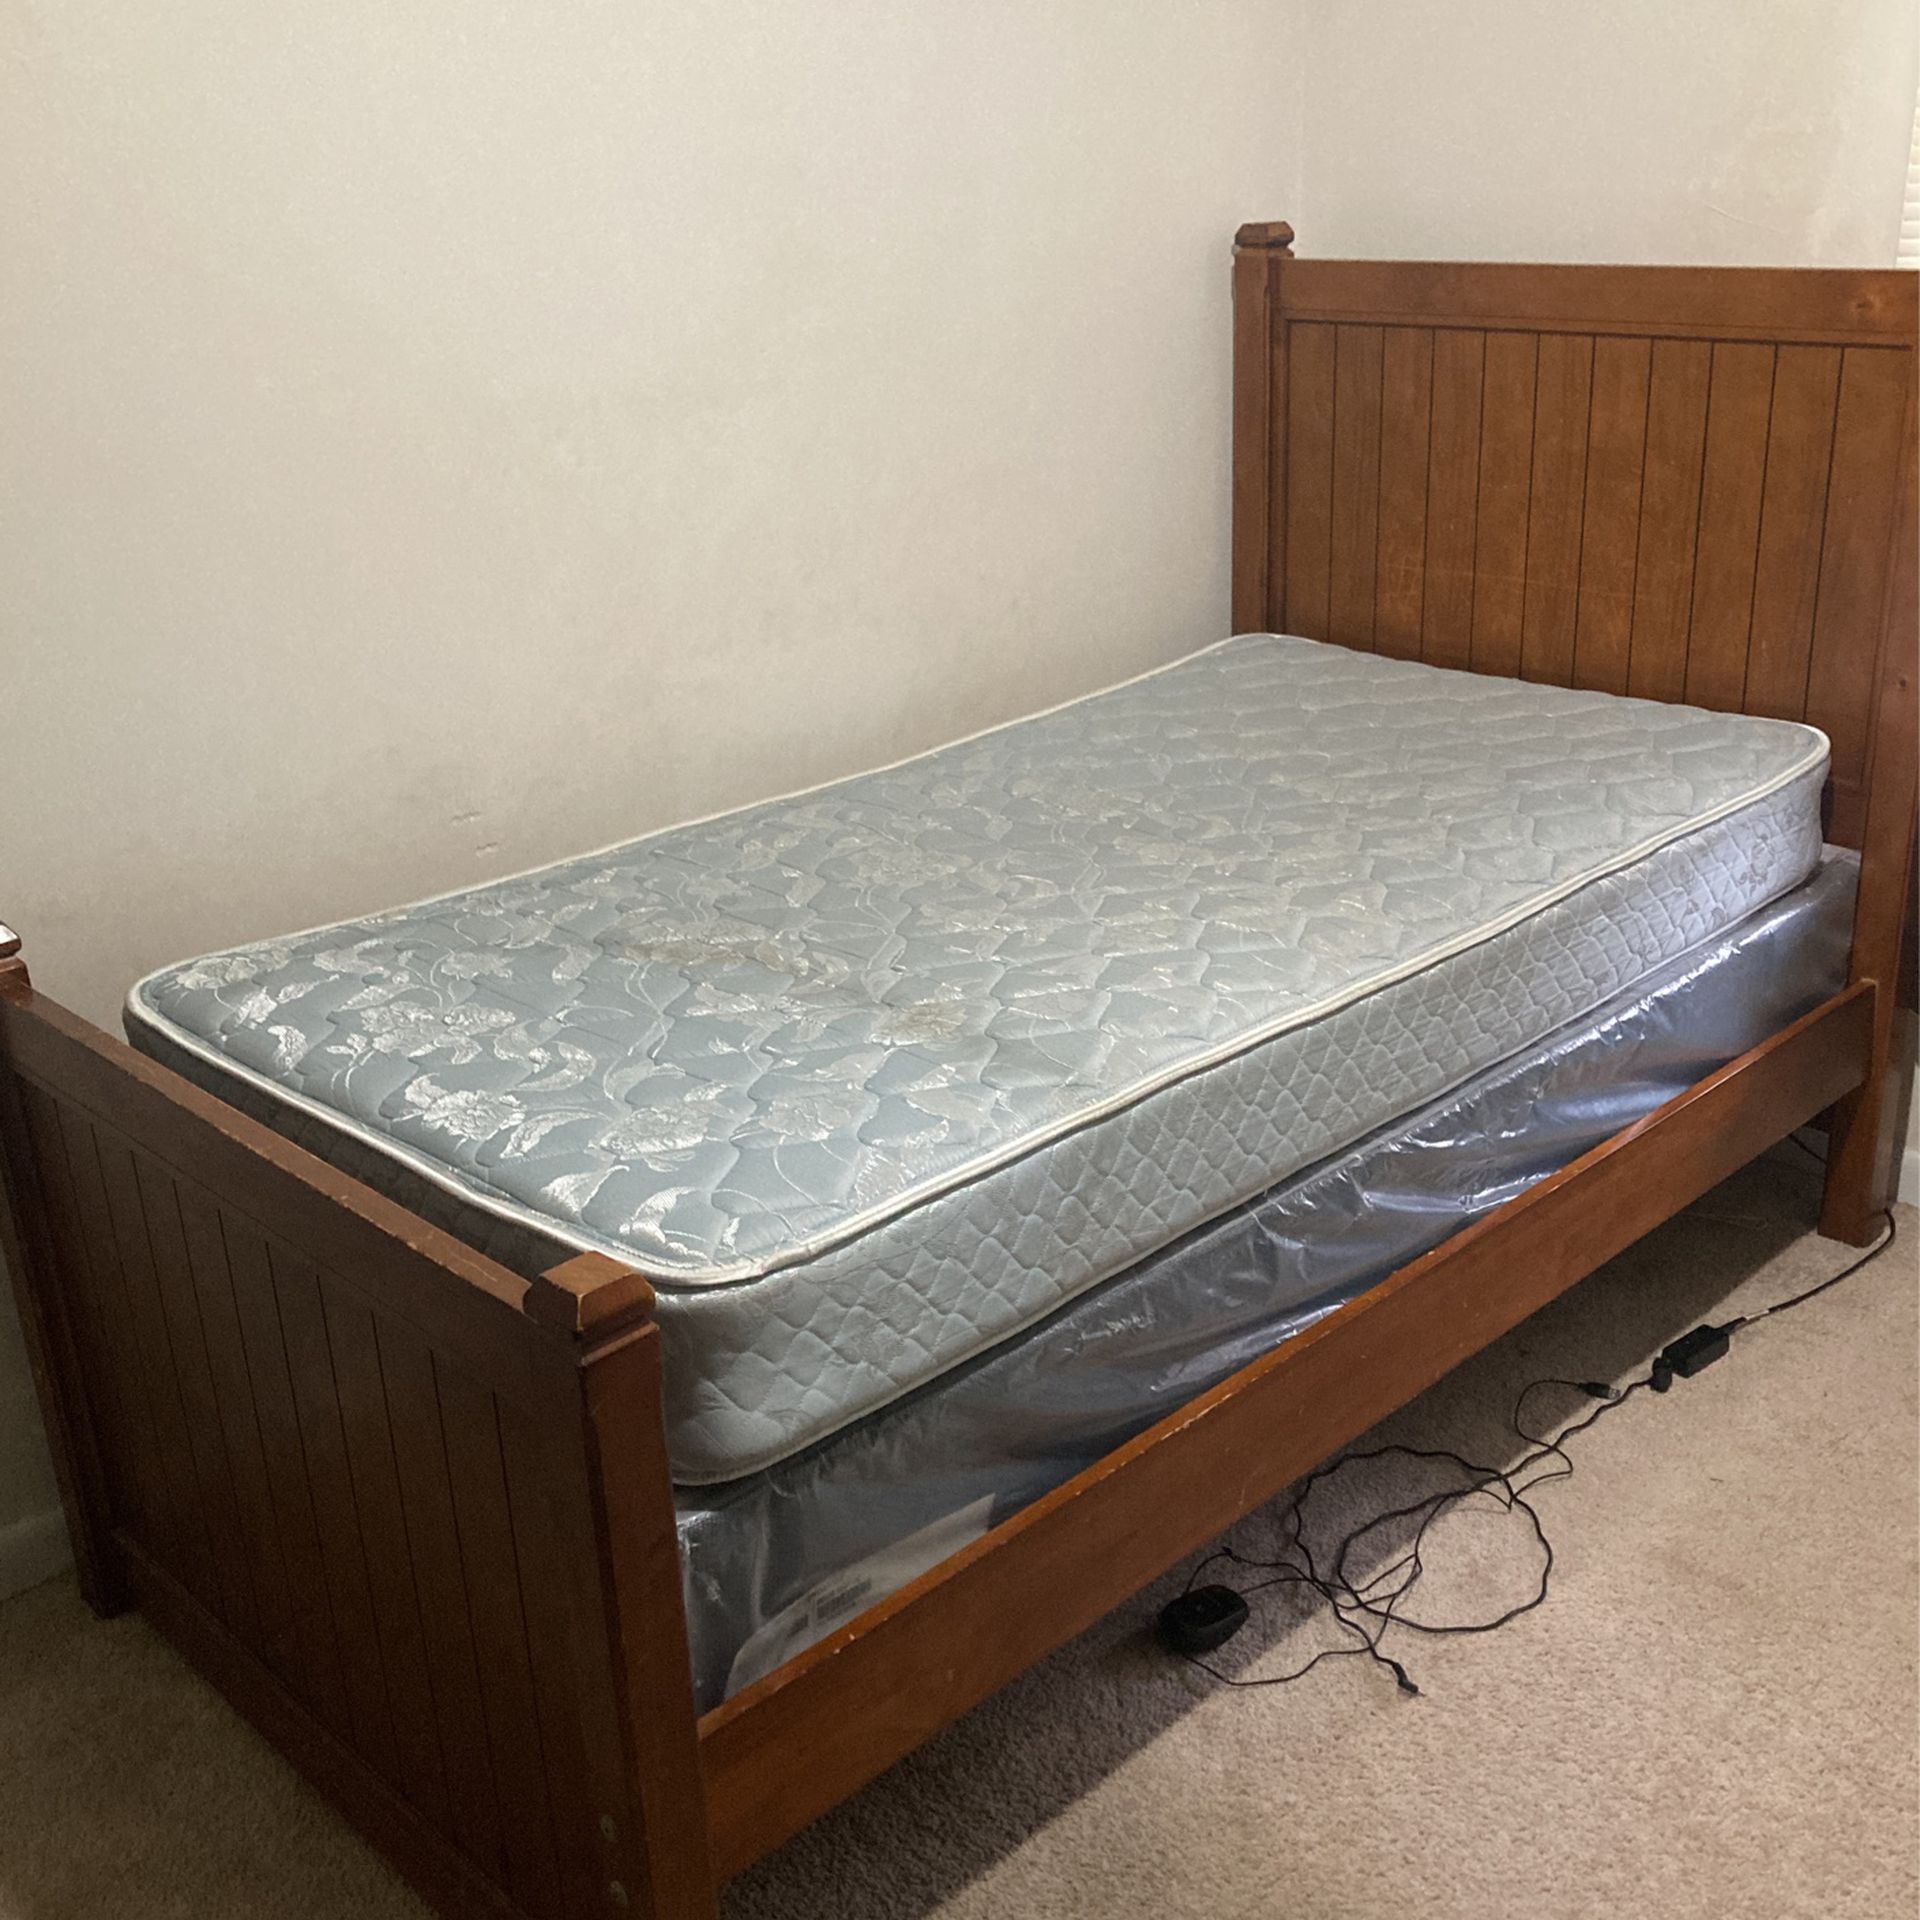 Twin Bed Mattress And Box Spring